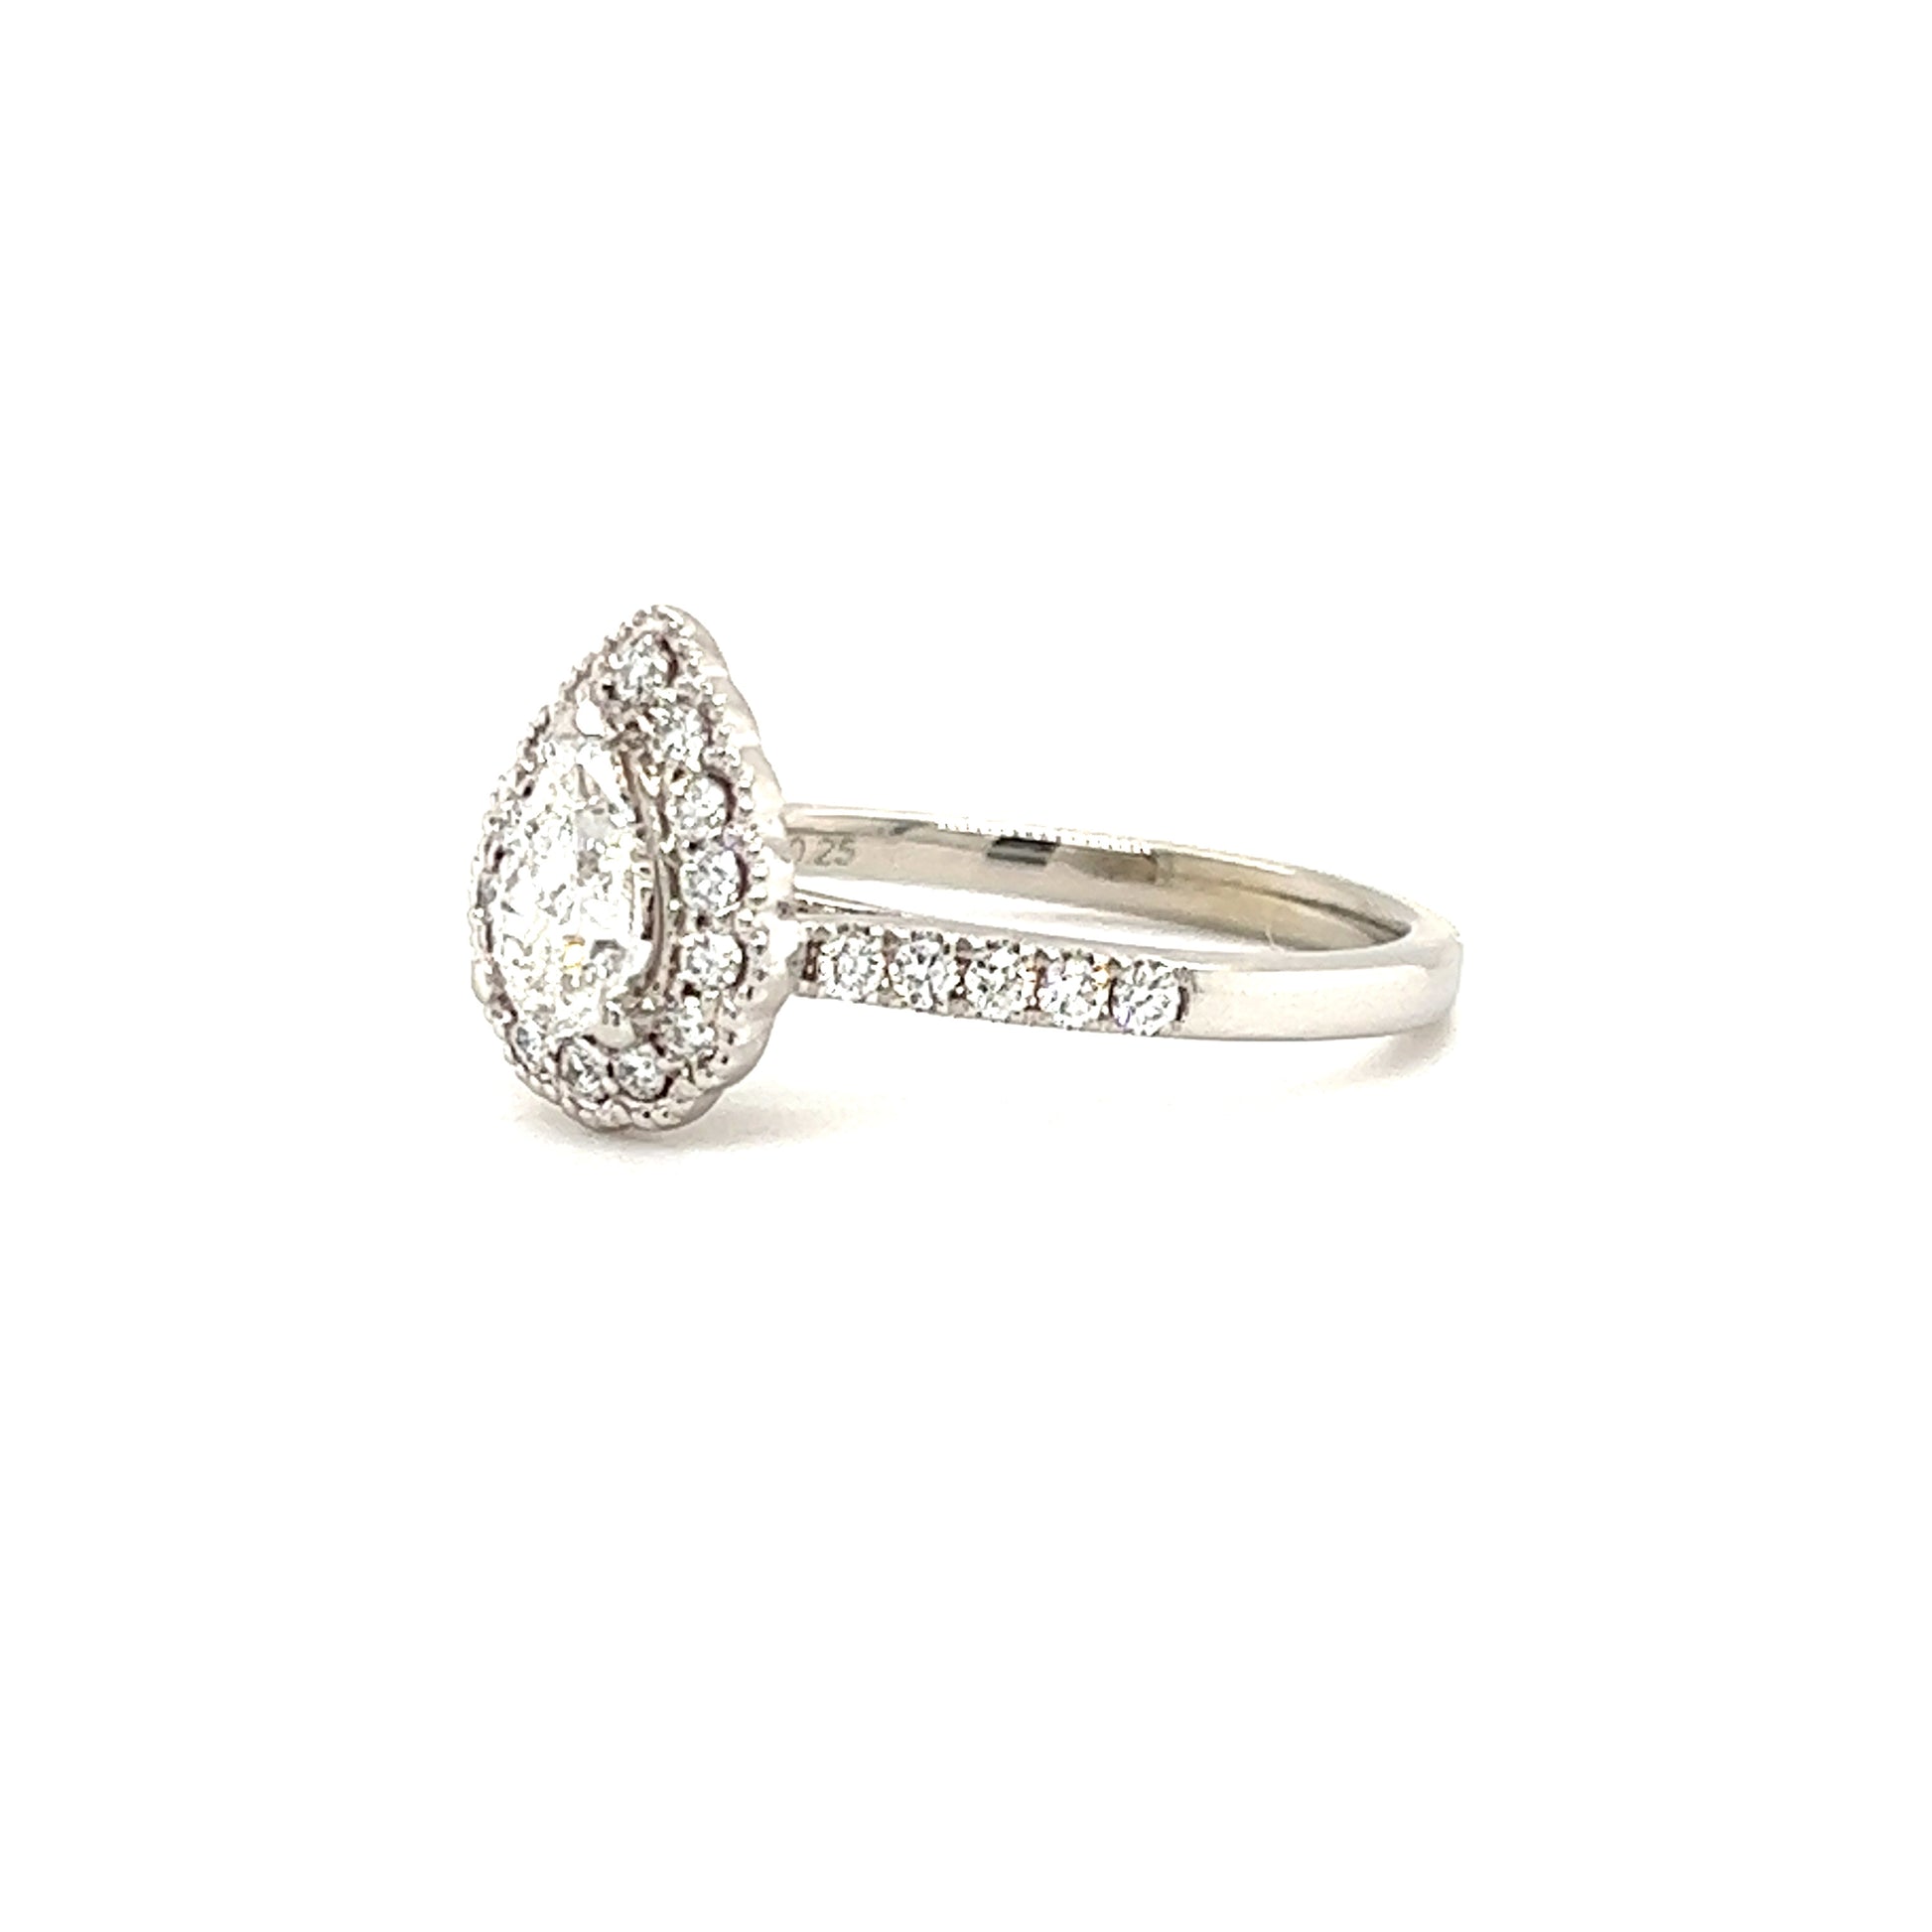 Pear Diamond Ring with Diamond Halo and Side Diamonds in 14K White Gold Right Side View